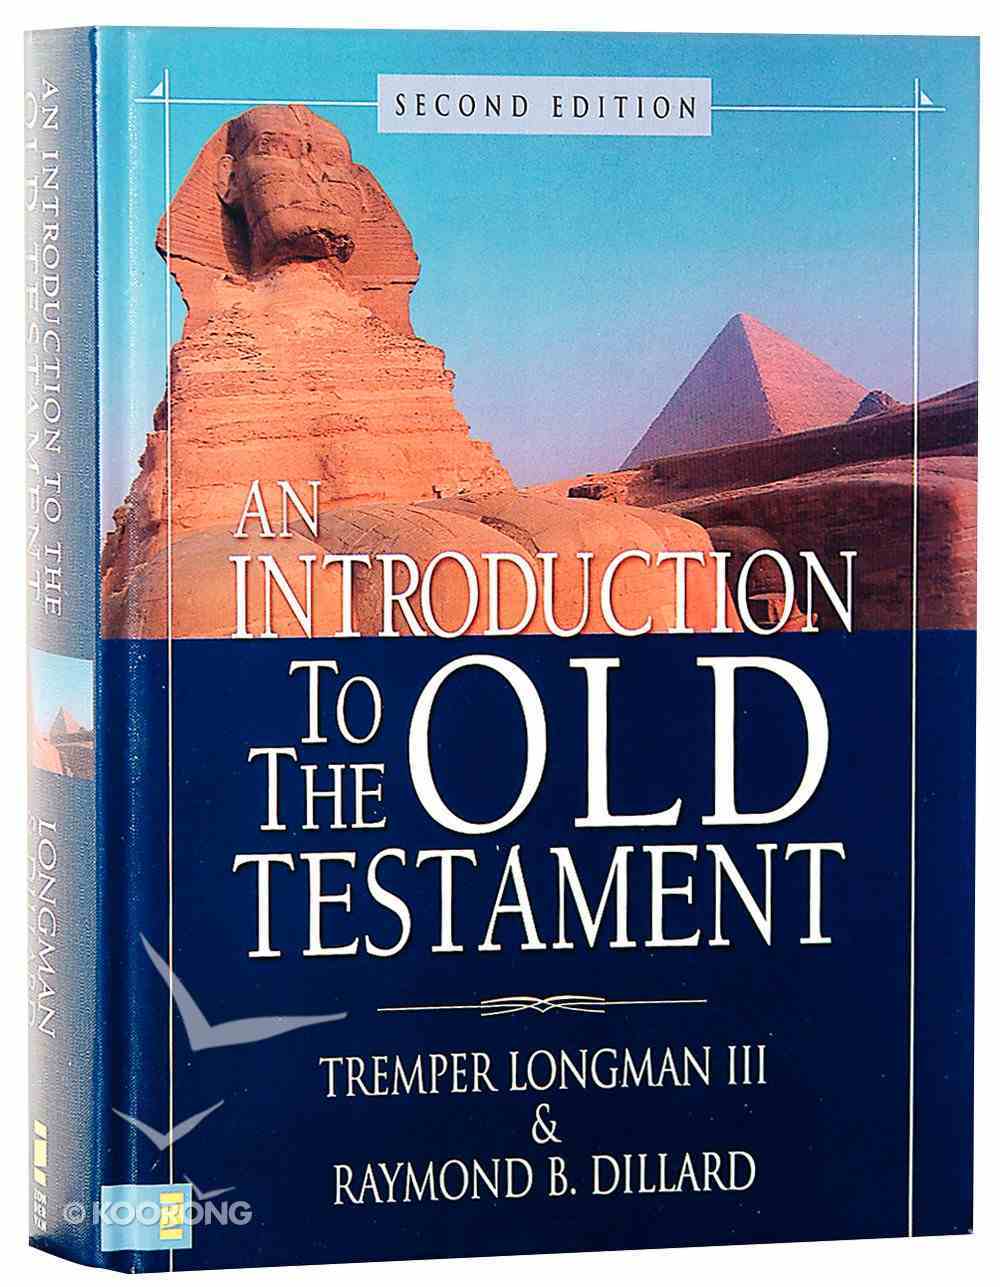 An Introduction to the Old Testament (Second Edition) Hardback